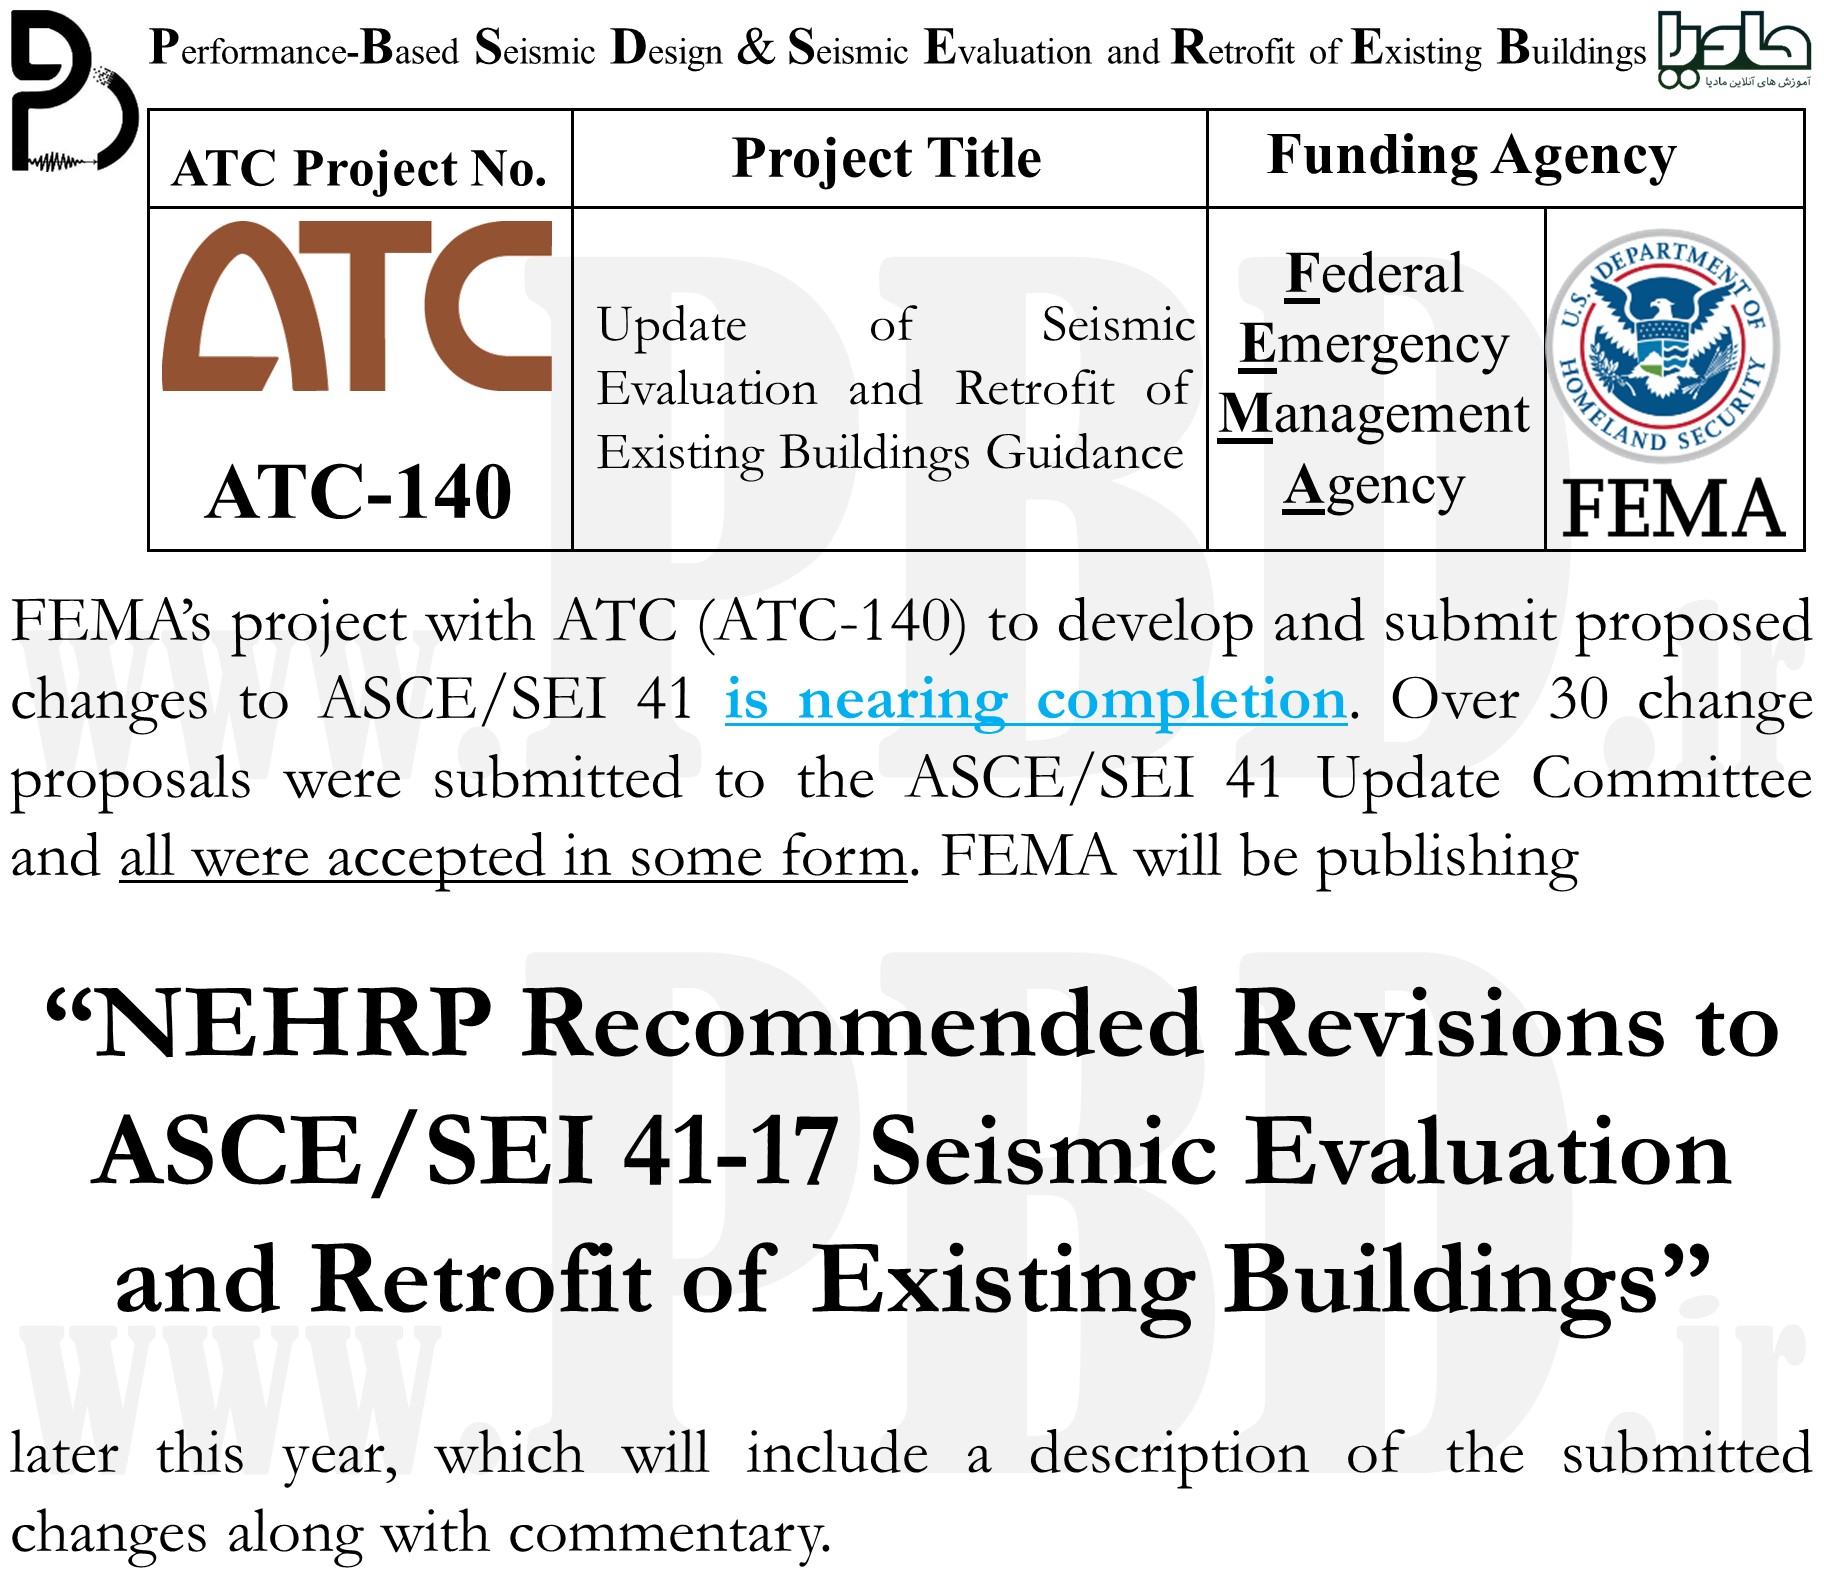 NEHRP Recommended Revisions to ASCE/SEI 41-17 Seismic Evaluation and Retrofit of Existing Buildings